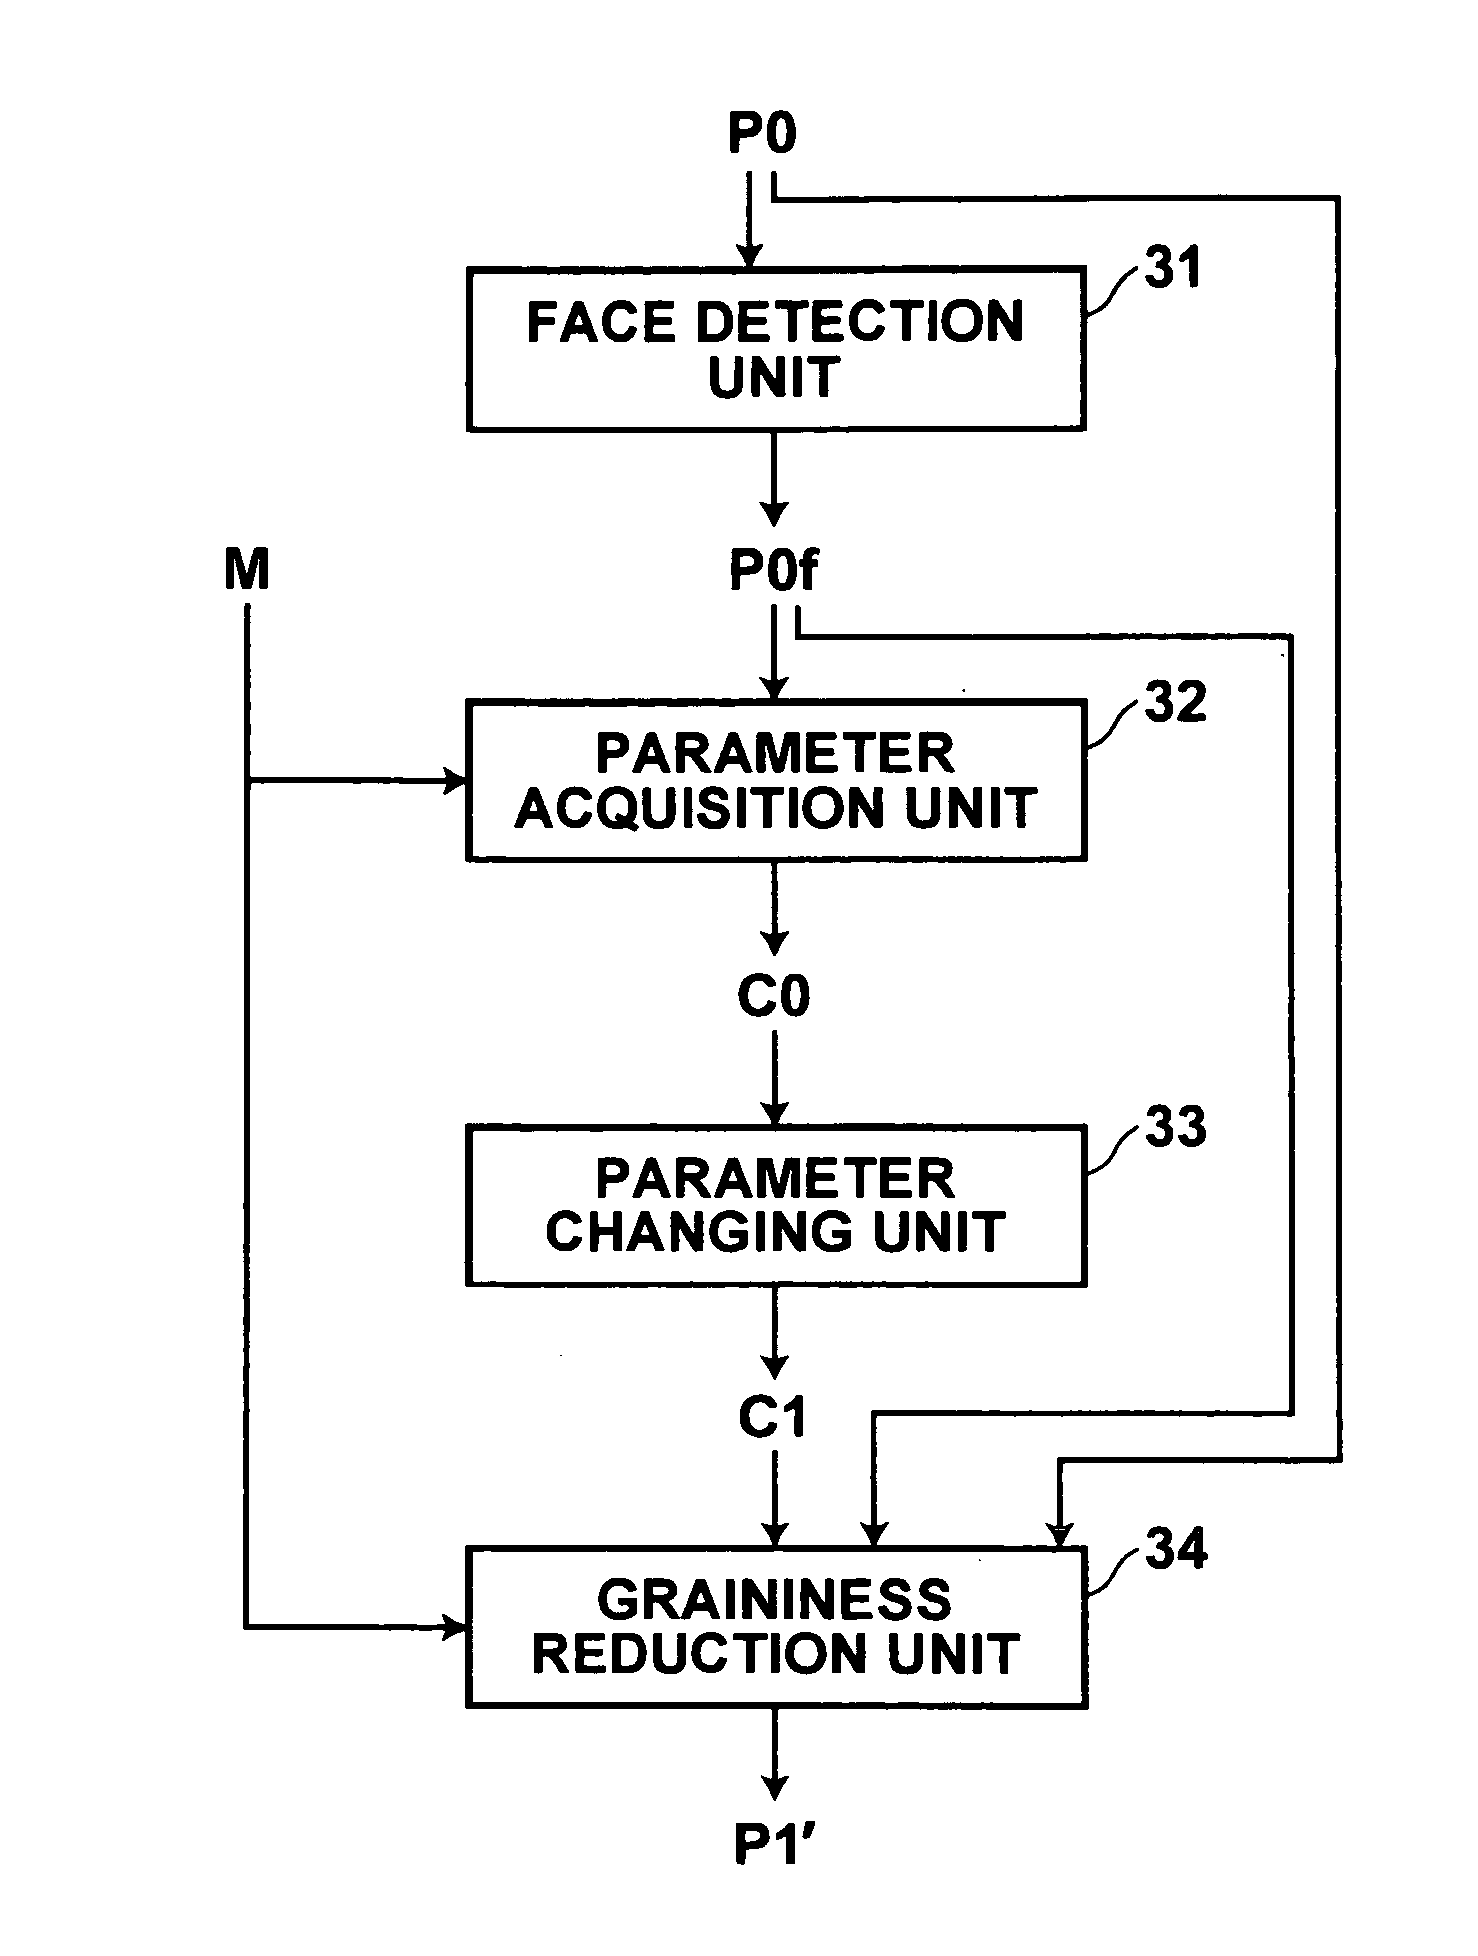 Apparatus, method and program for image processing